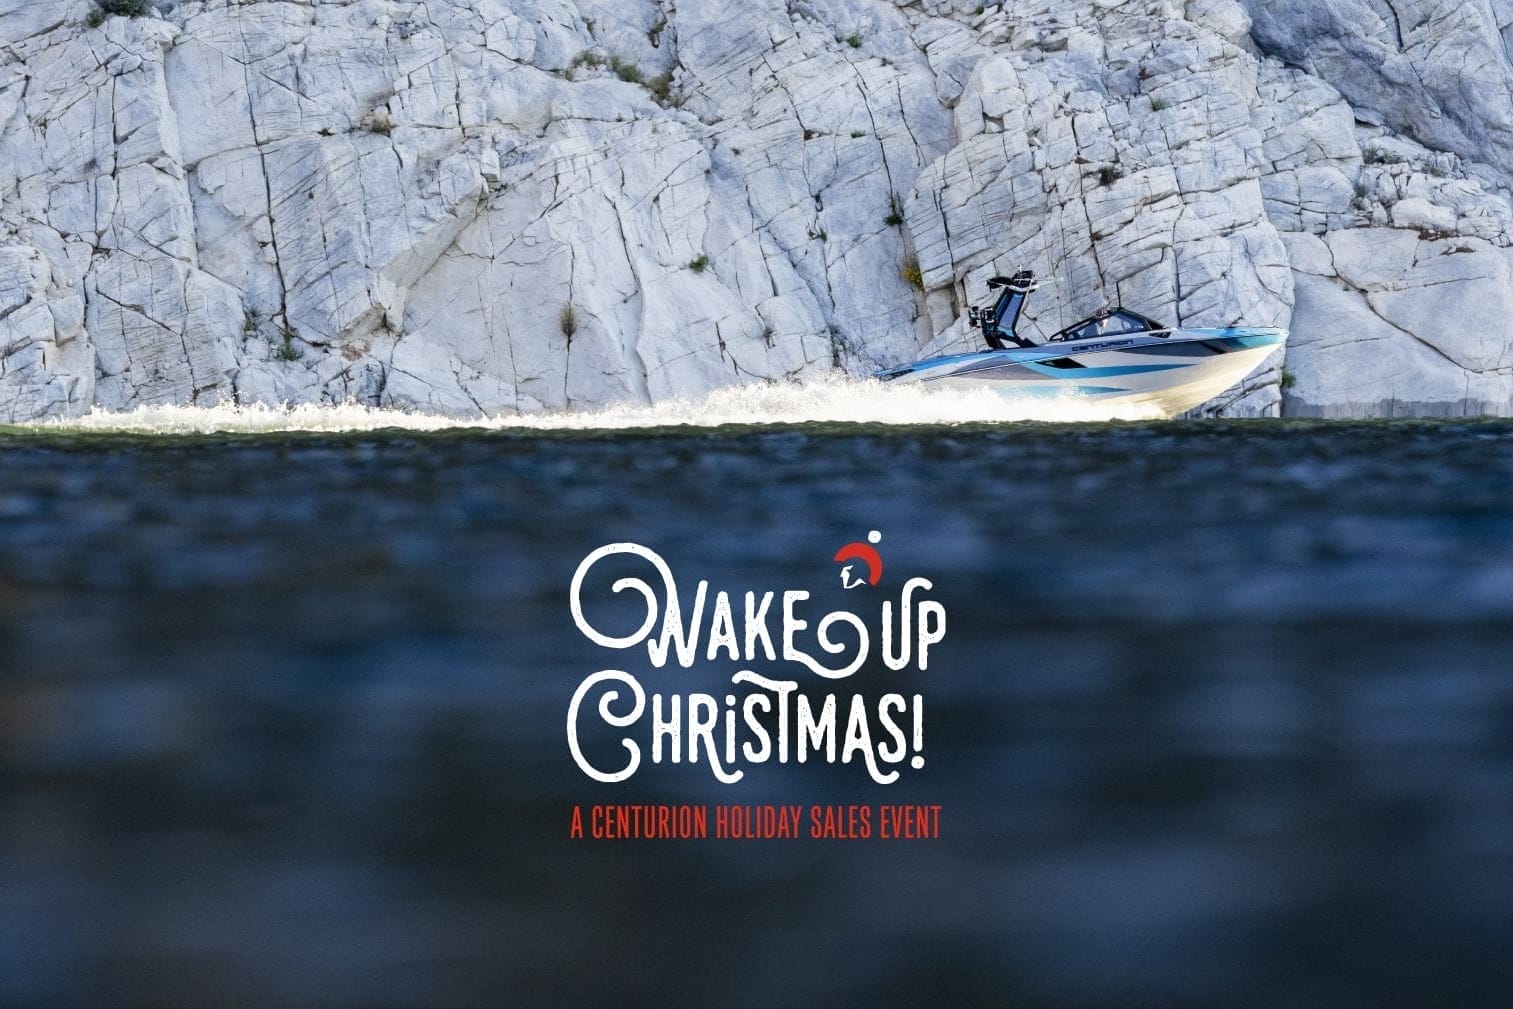 Wake up Christmas with the Centurion Holiday Sales Event. Get incredible deals on Centurion Boats during this limited-time sale.